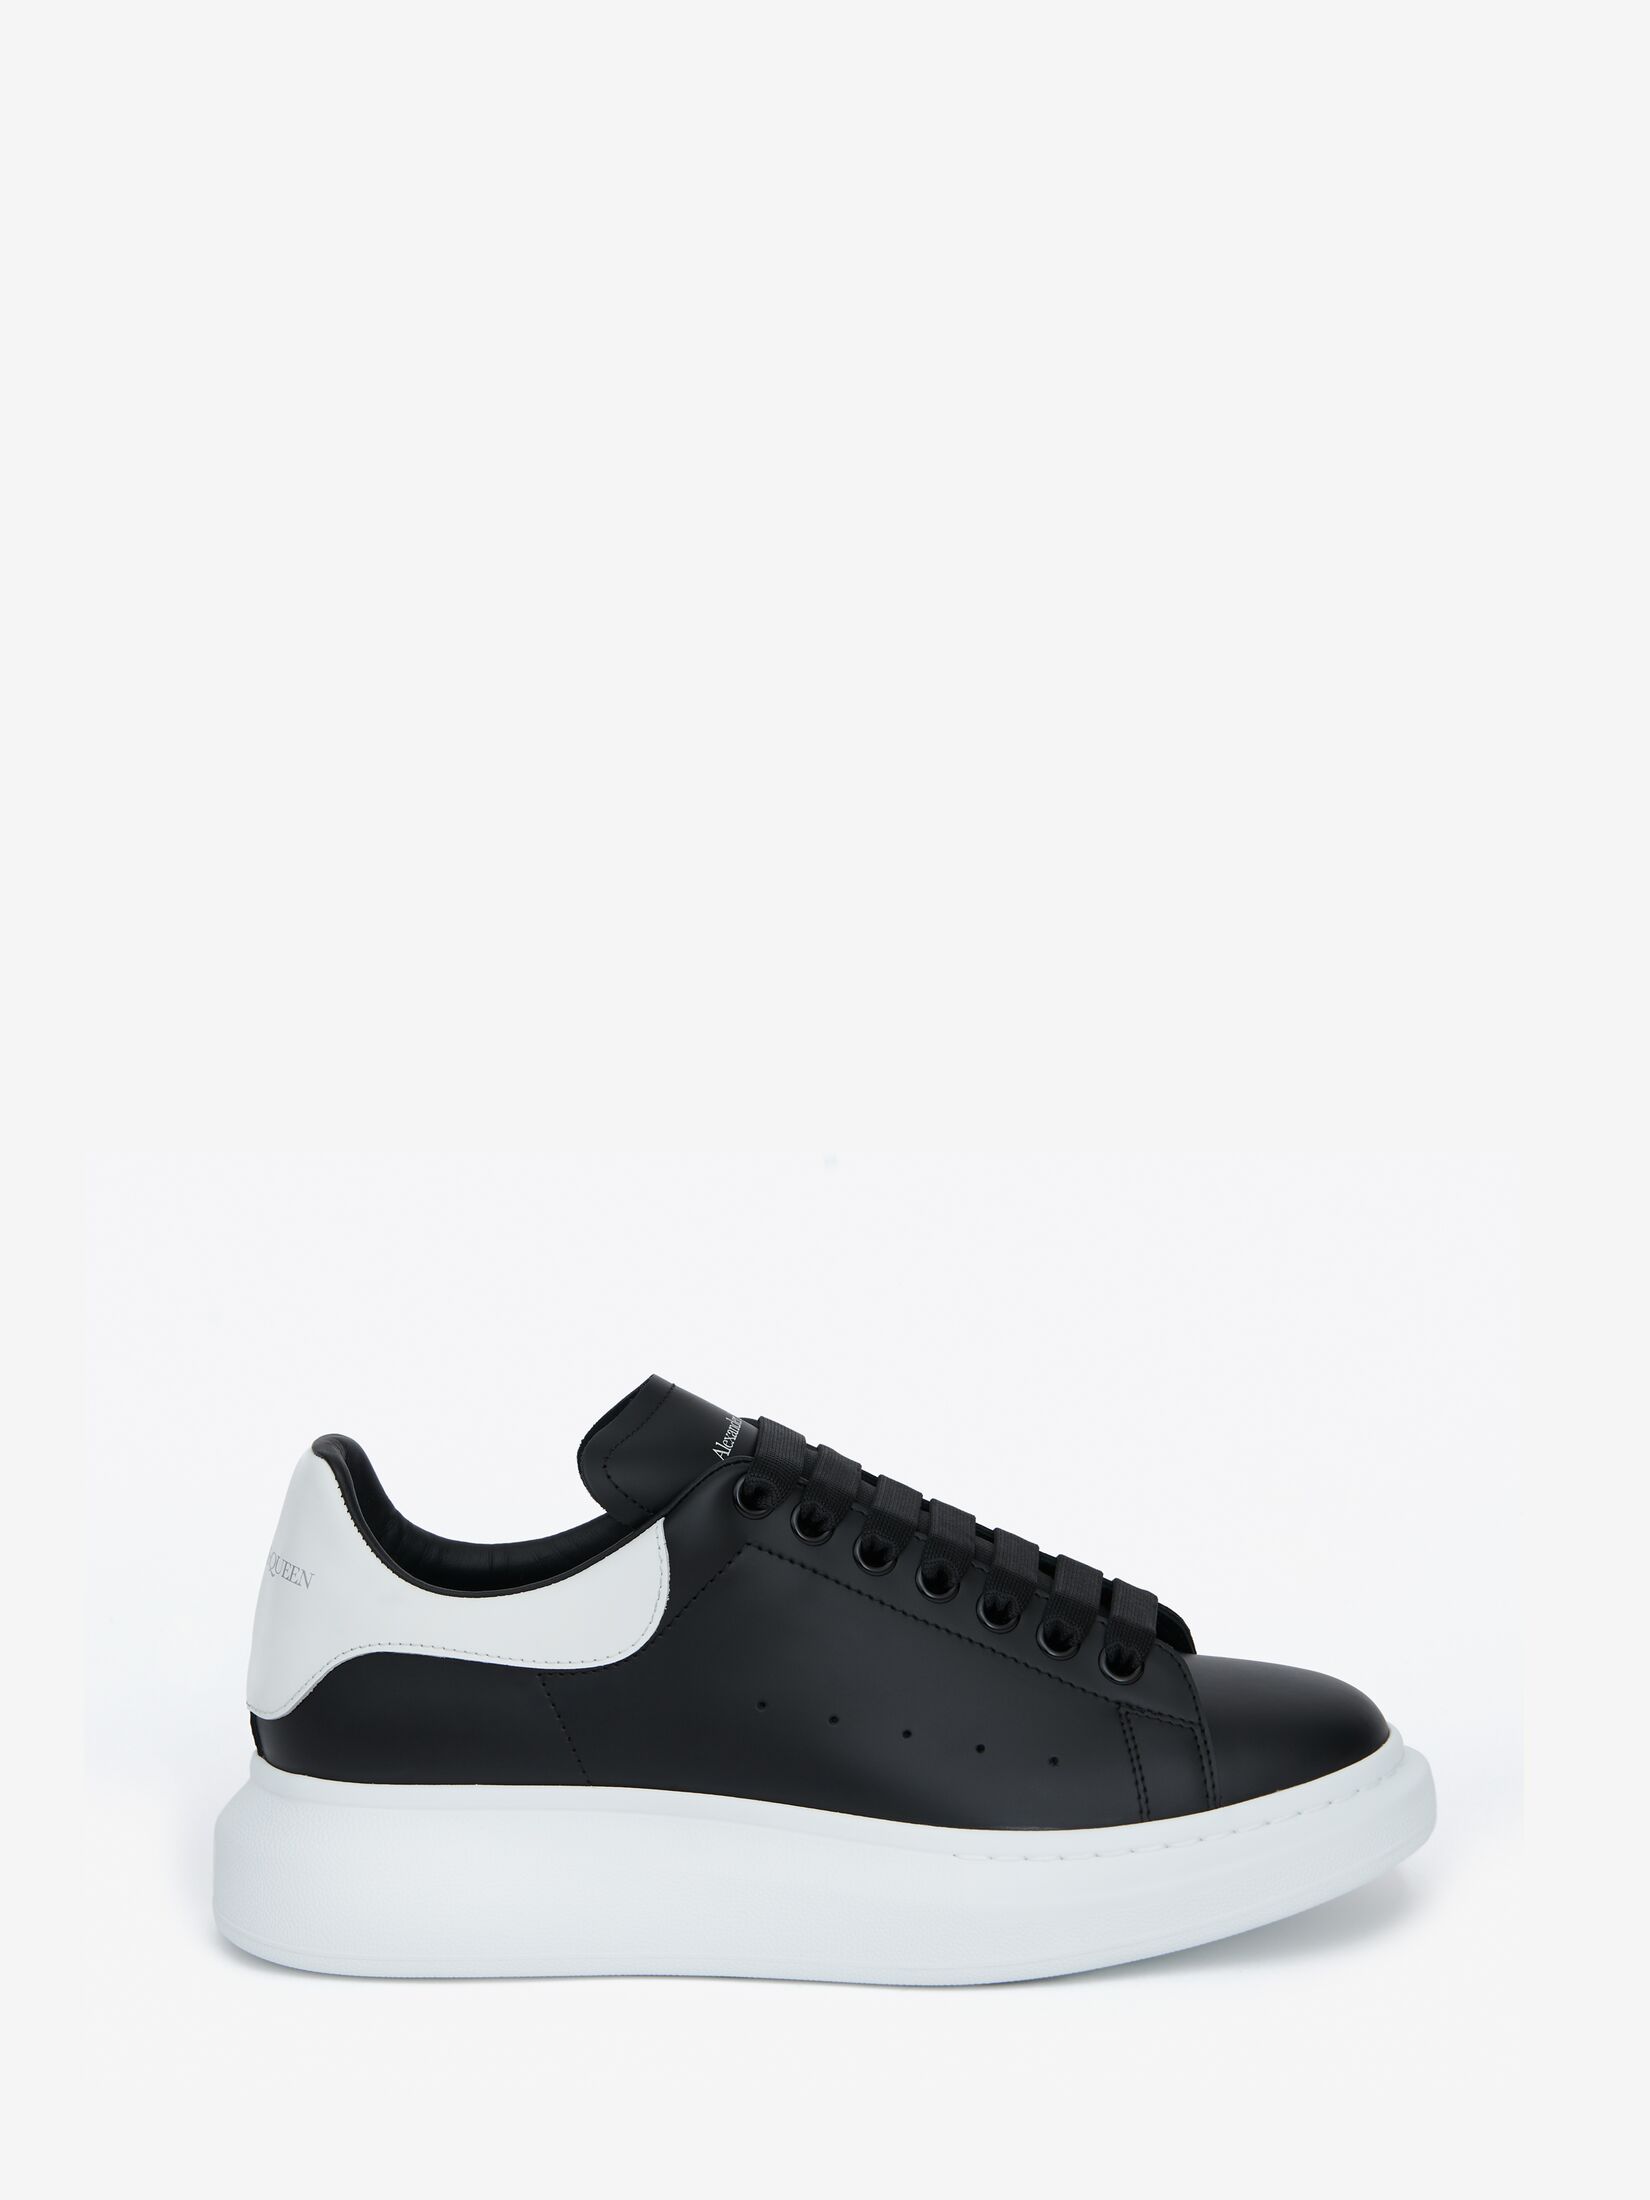 Sale | Shoes | Up to 50% Off | SSENSE